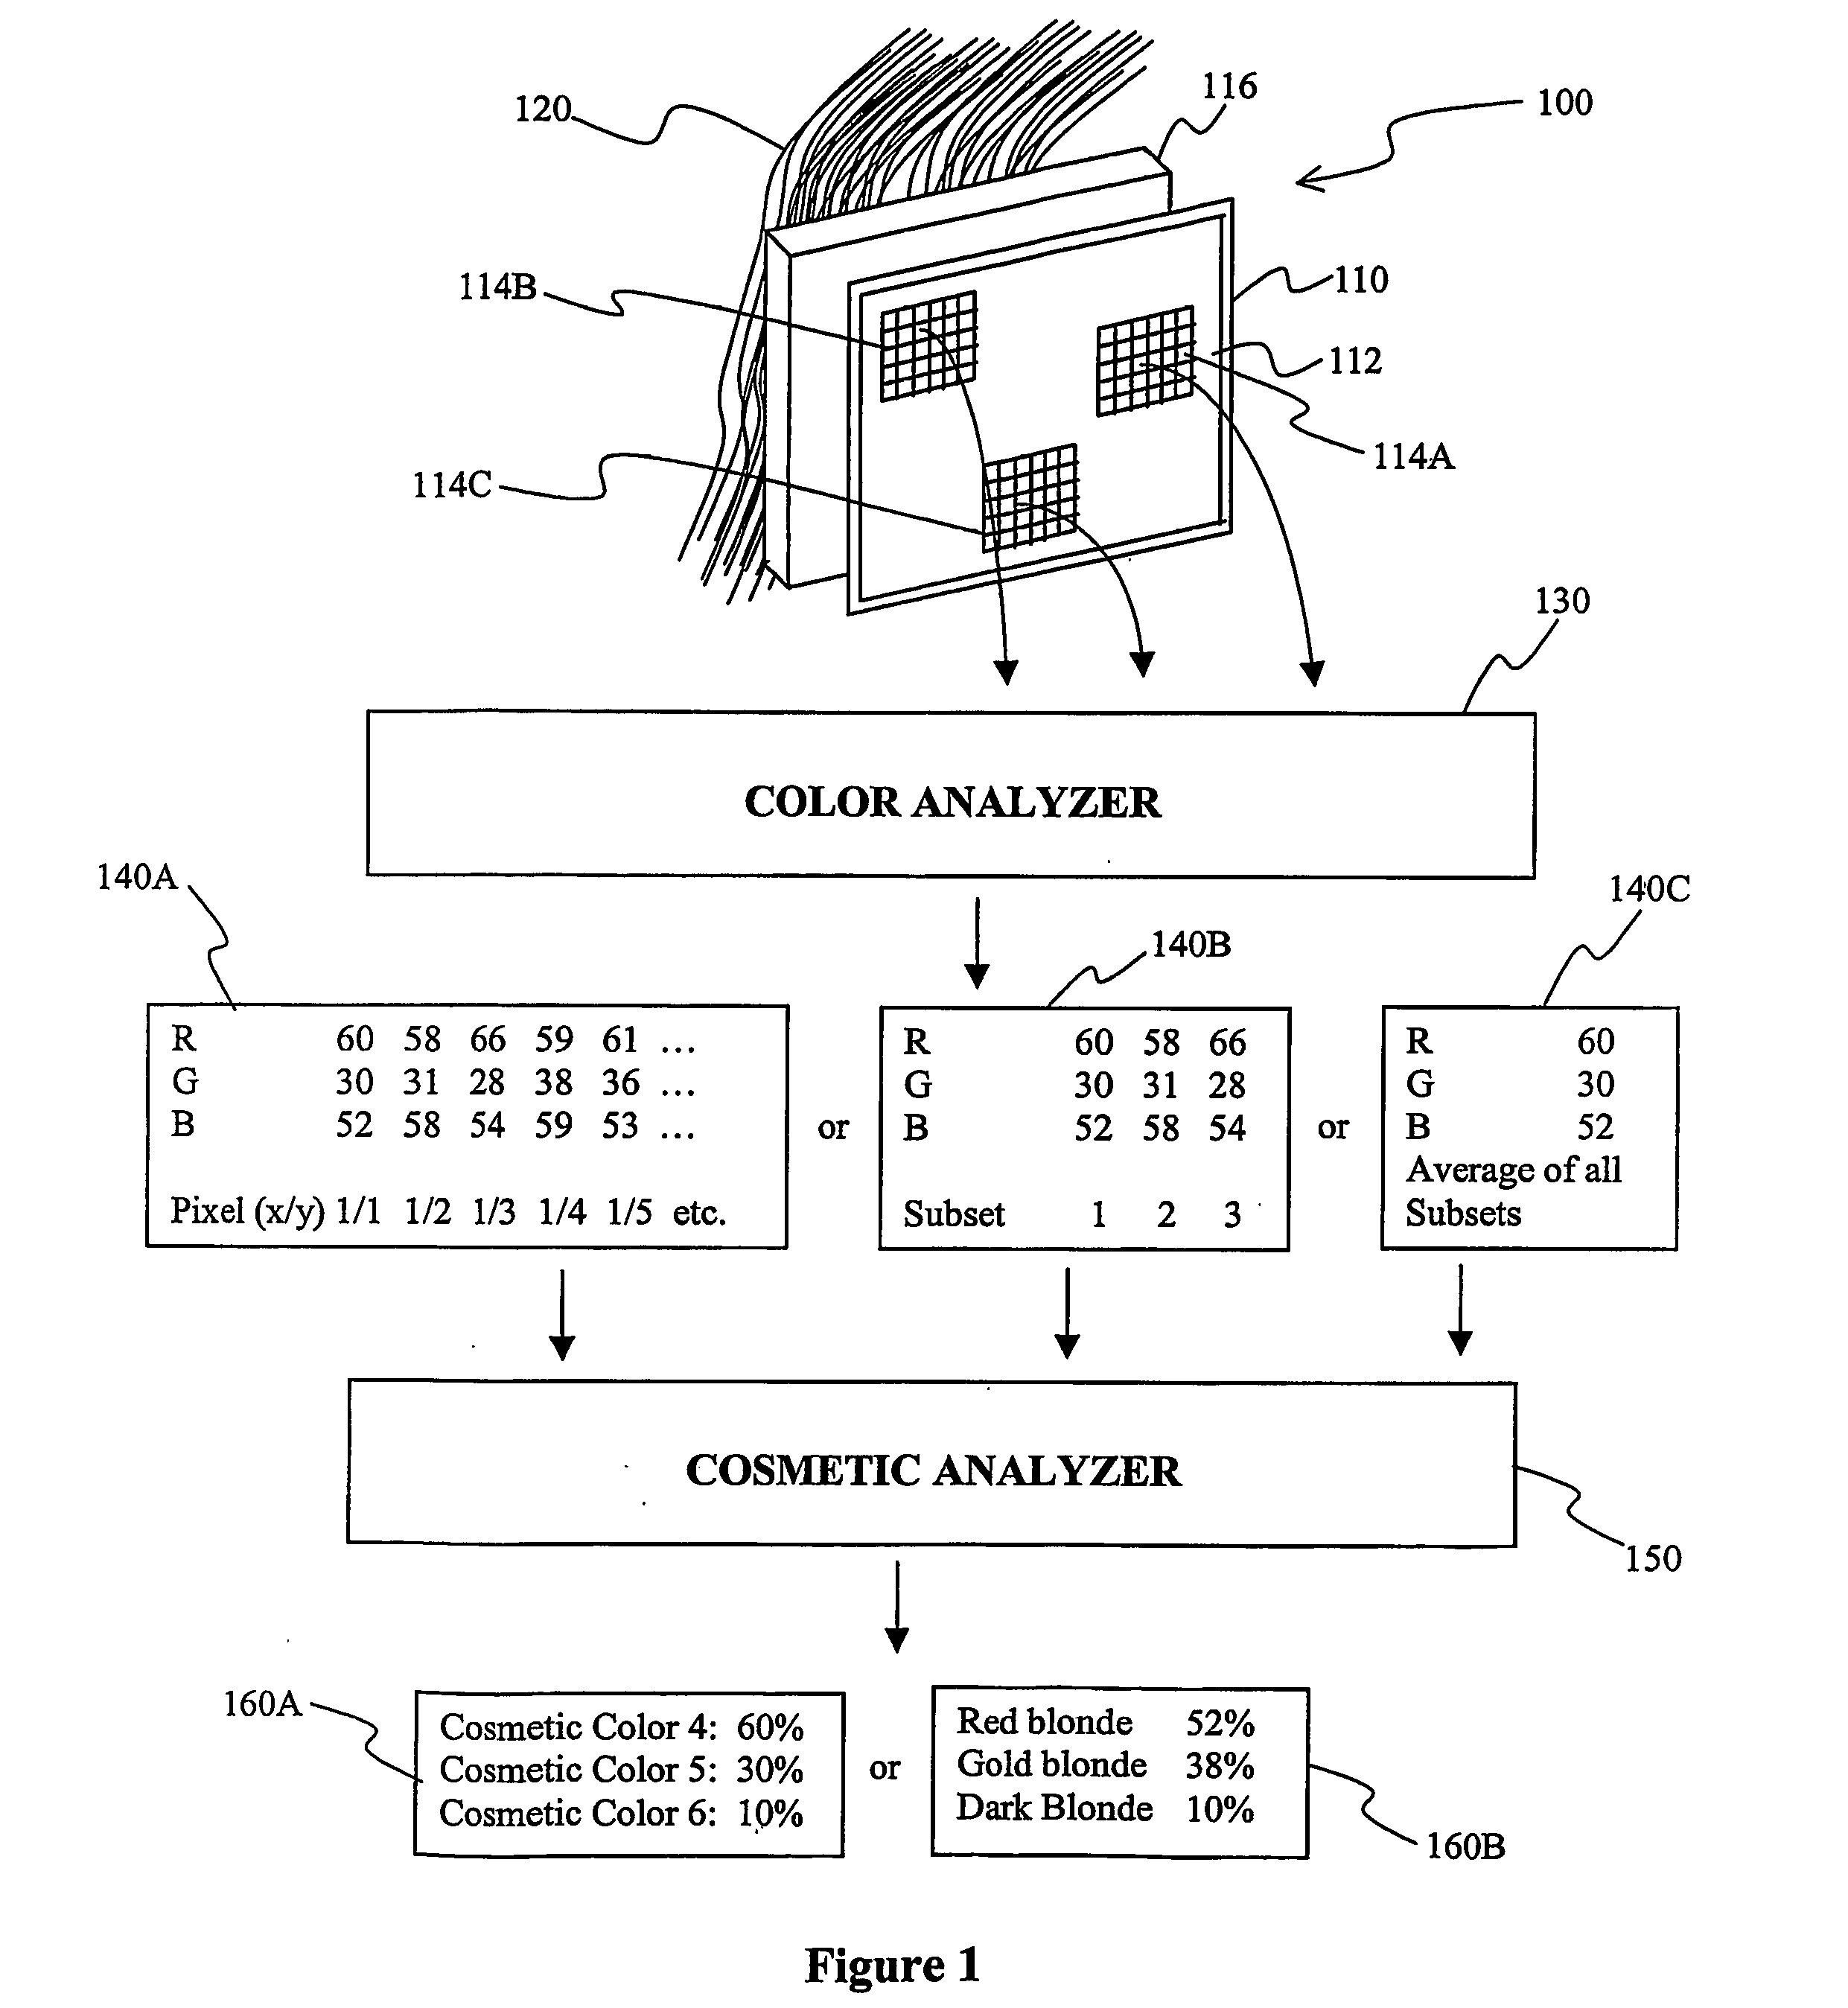 Advanced cosmetic color analysis system and methods therefor